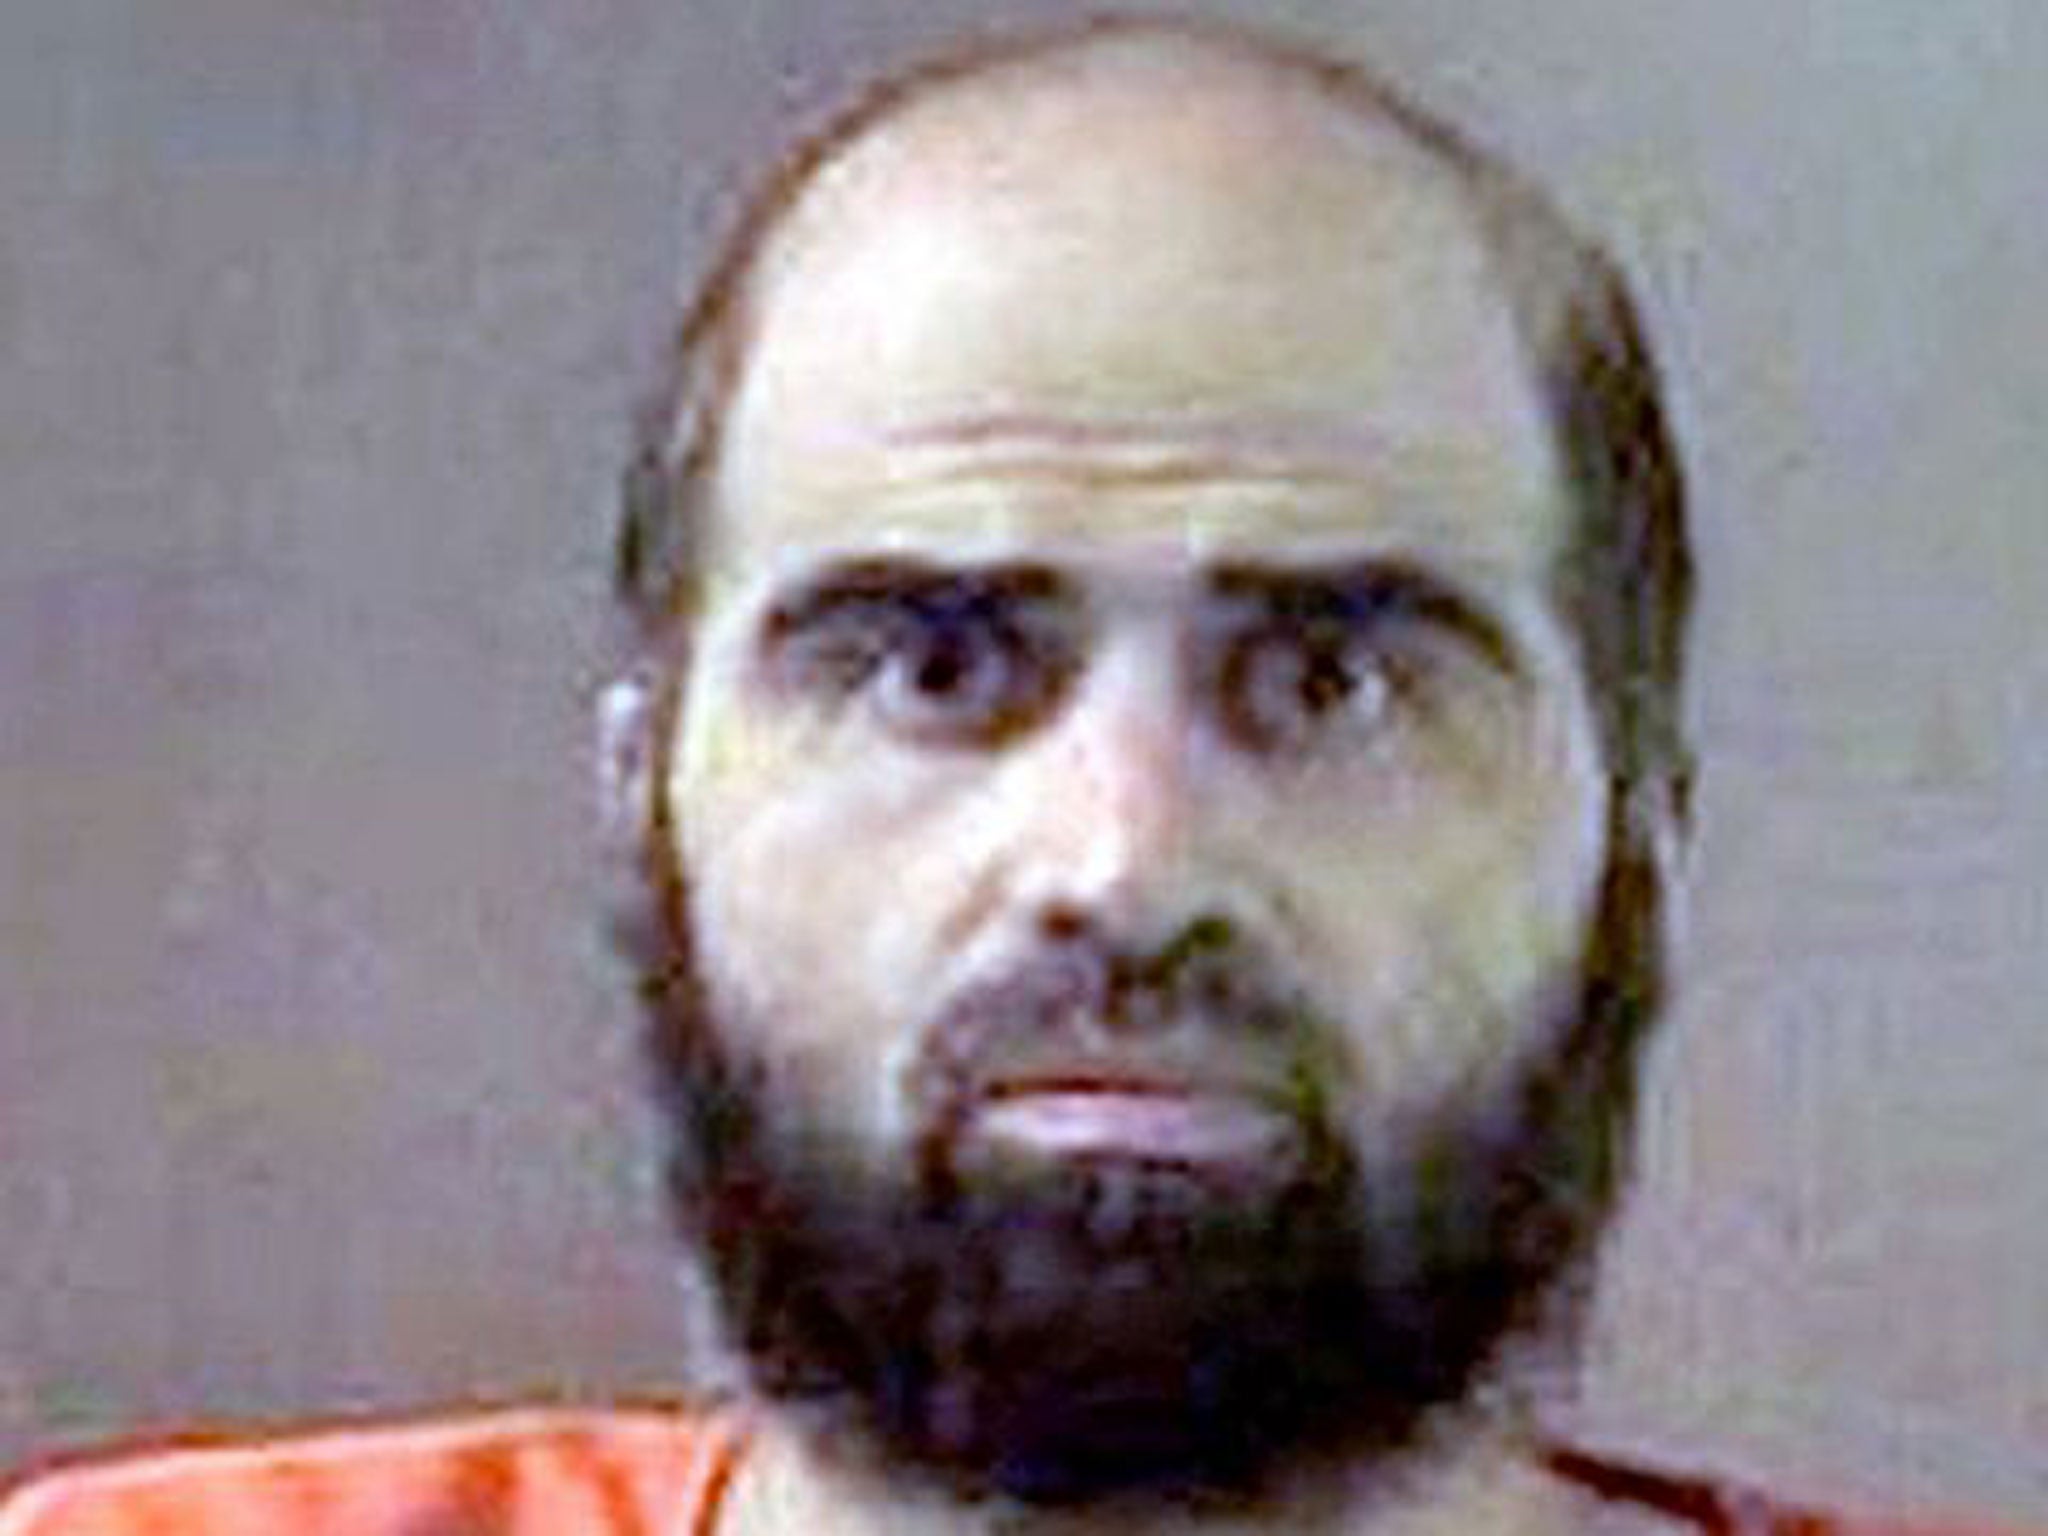 The former US Army psychiatrist, Nidal Hasan, is a Muslim born in Virginia to Palestinian parents who emigrated from the West Bank